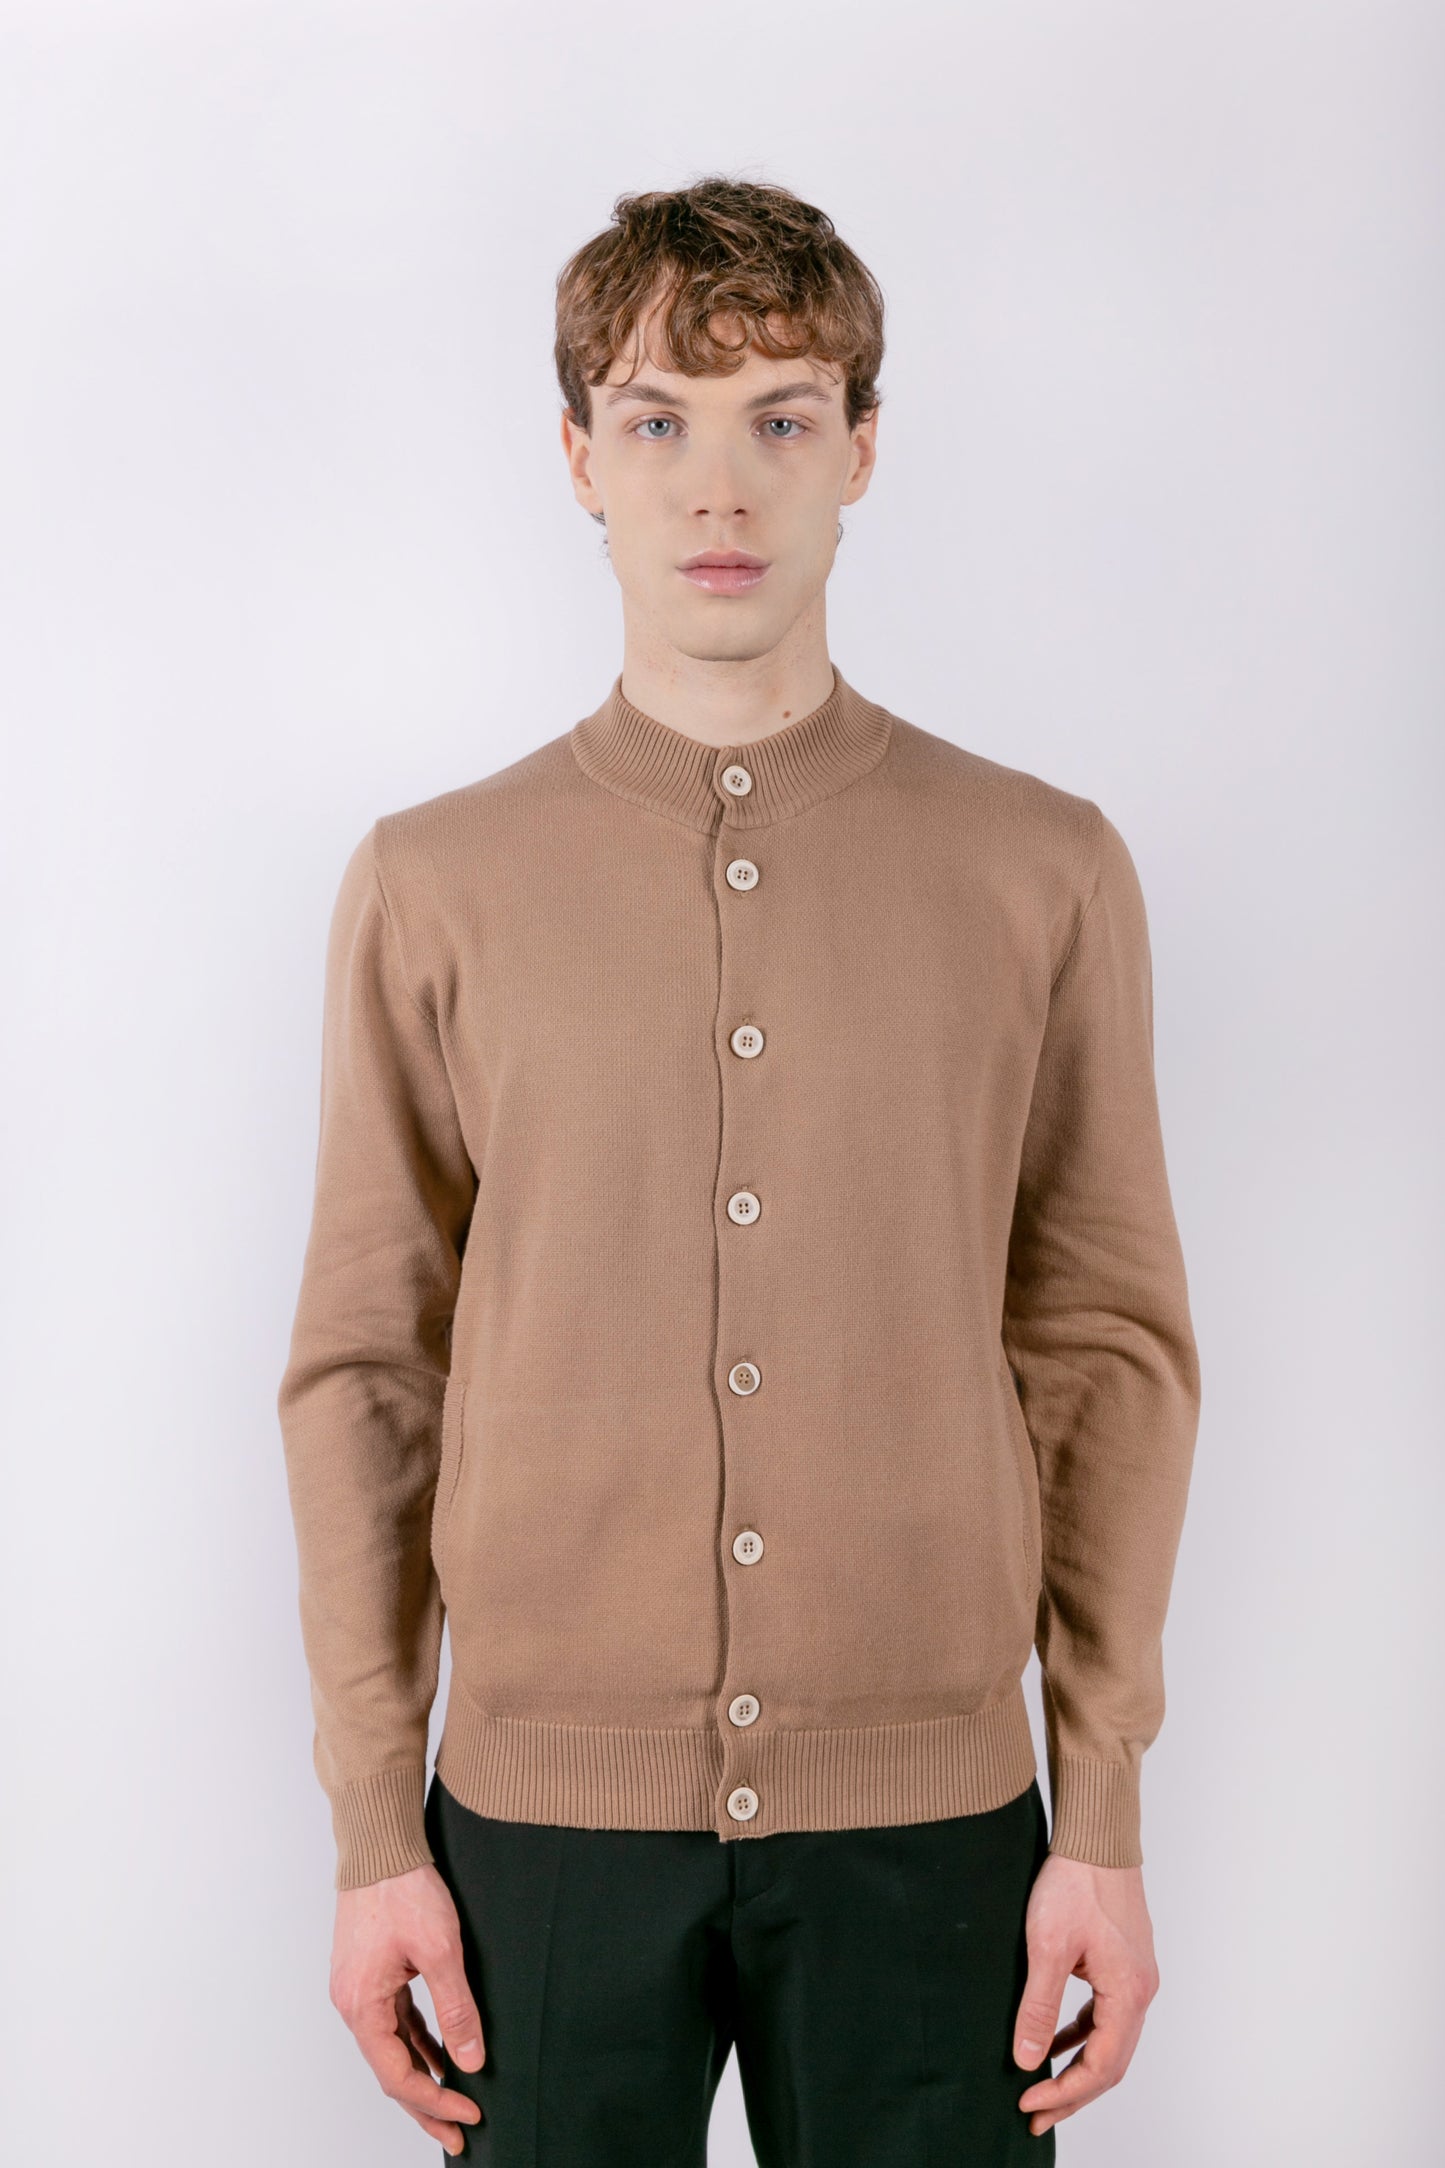 Hazelnut cotton jacket with buttons